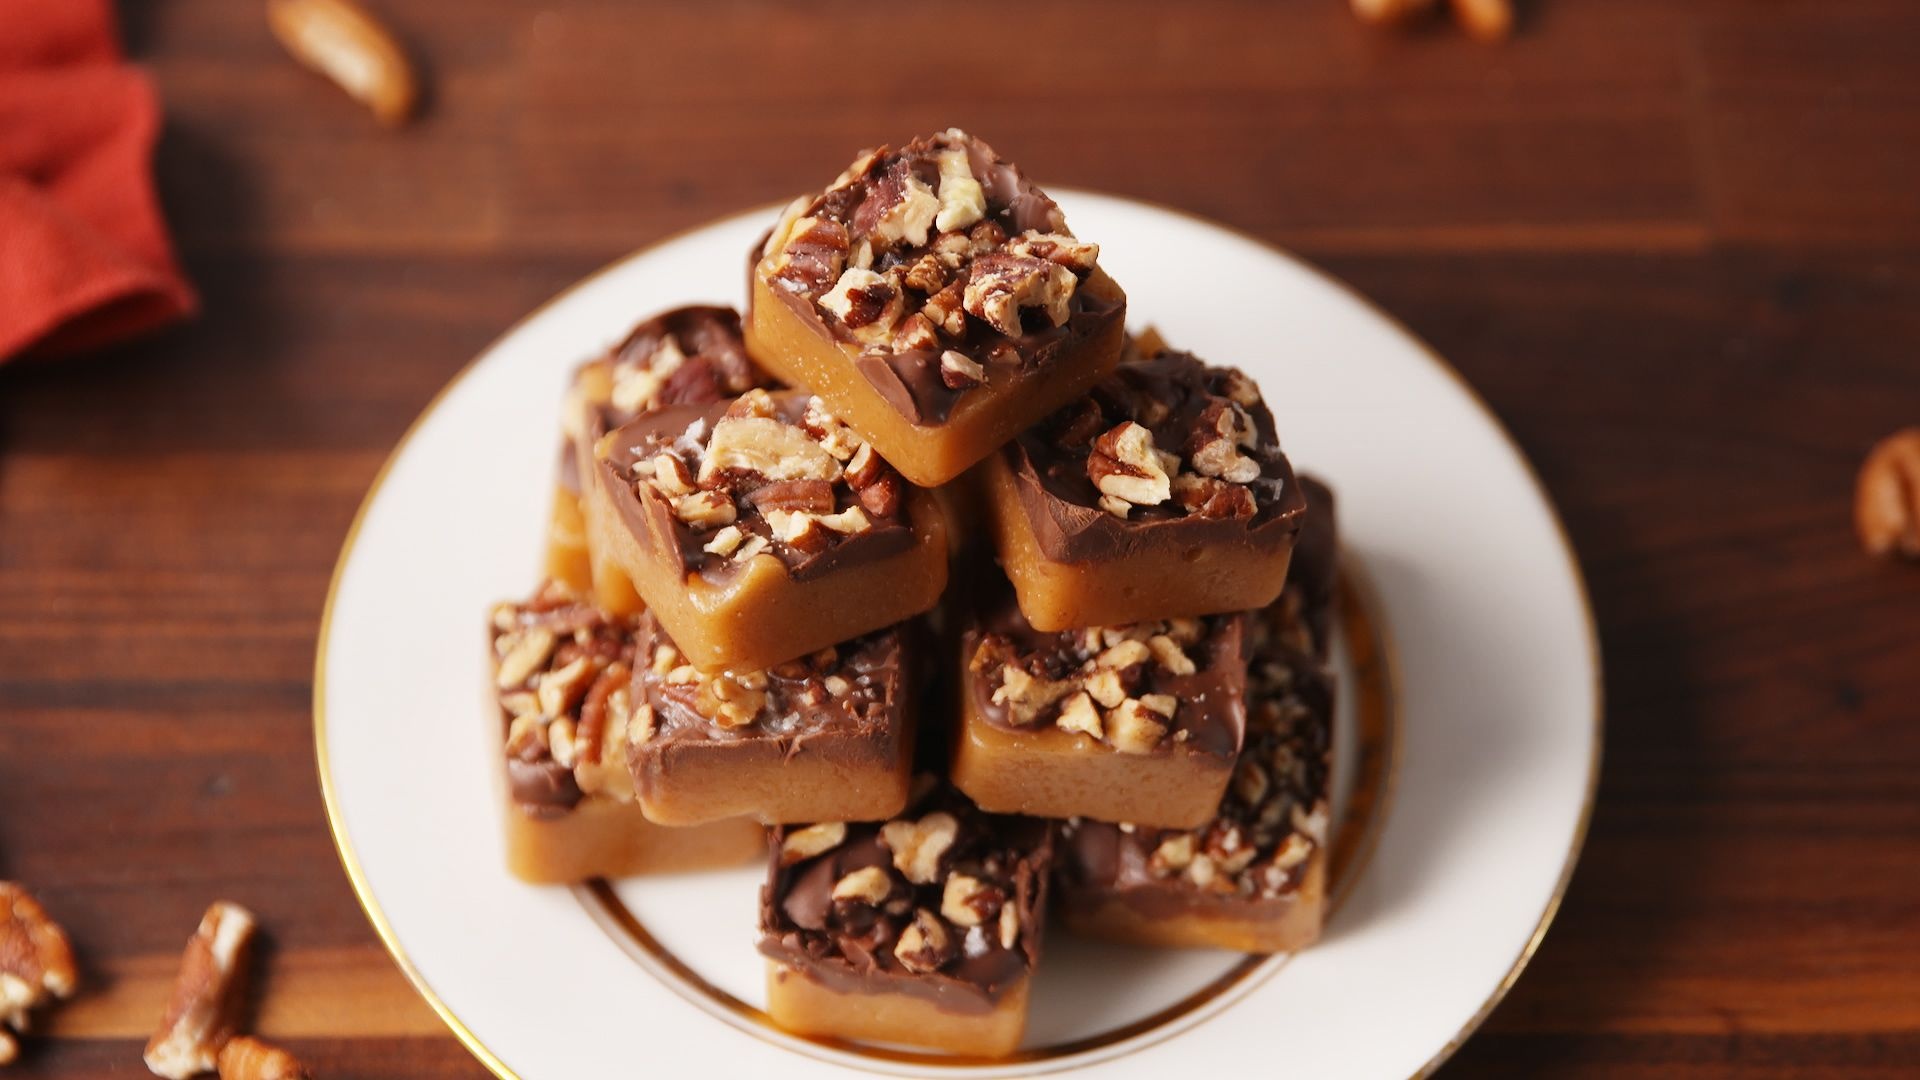 Toffee bites recipe, Sweet and crunchy, Homemade candy, Bite-sized delight, 1920x1080 Full HD Desktop